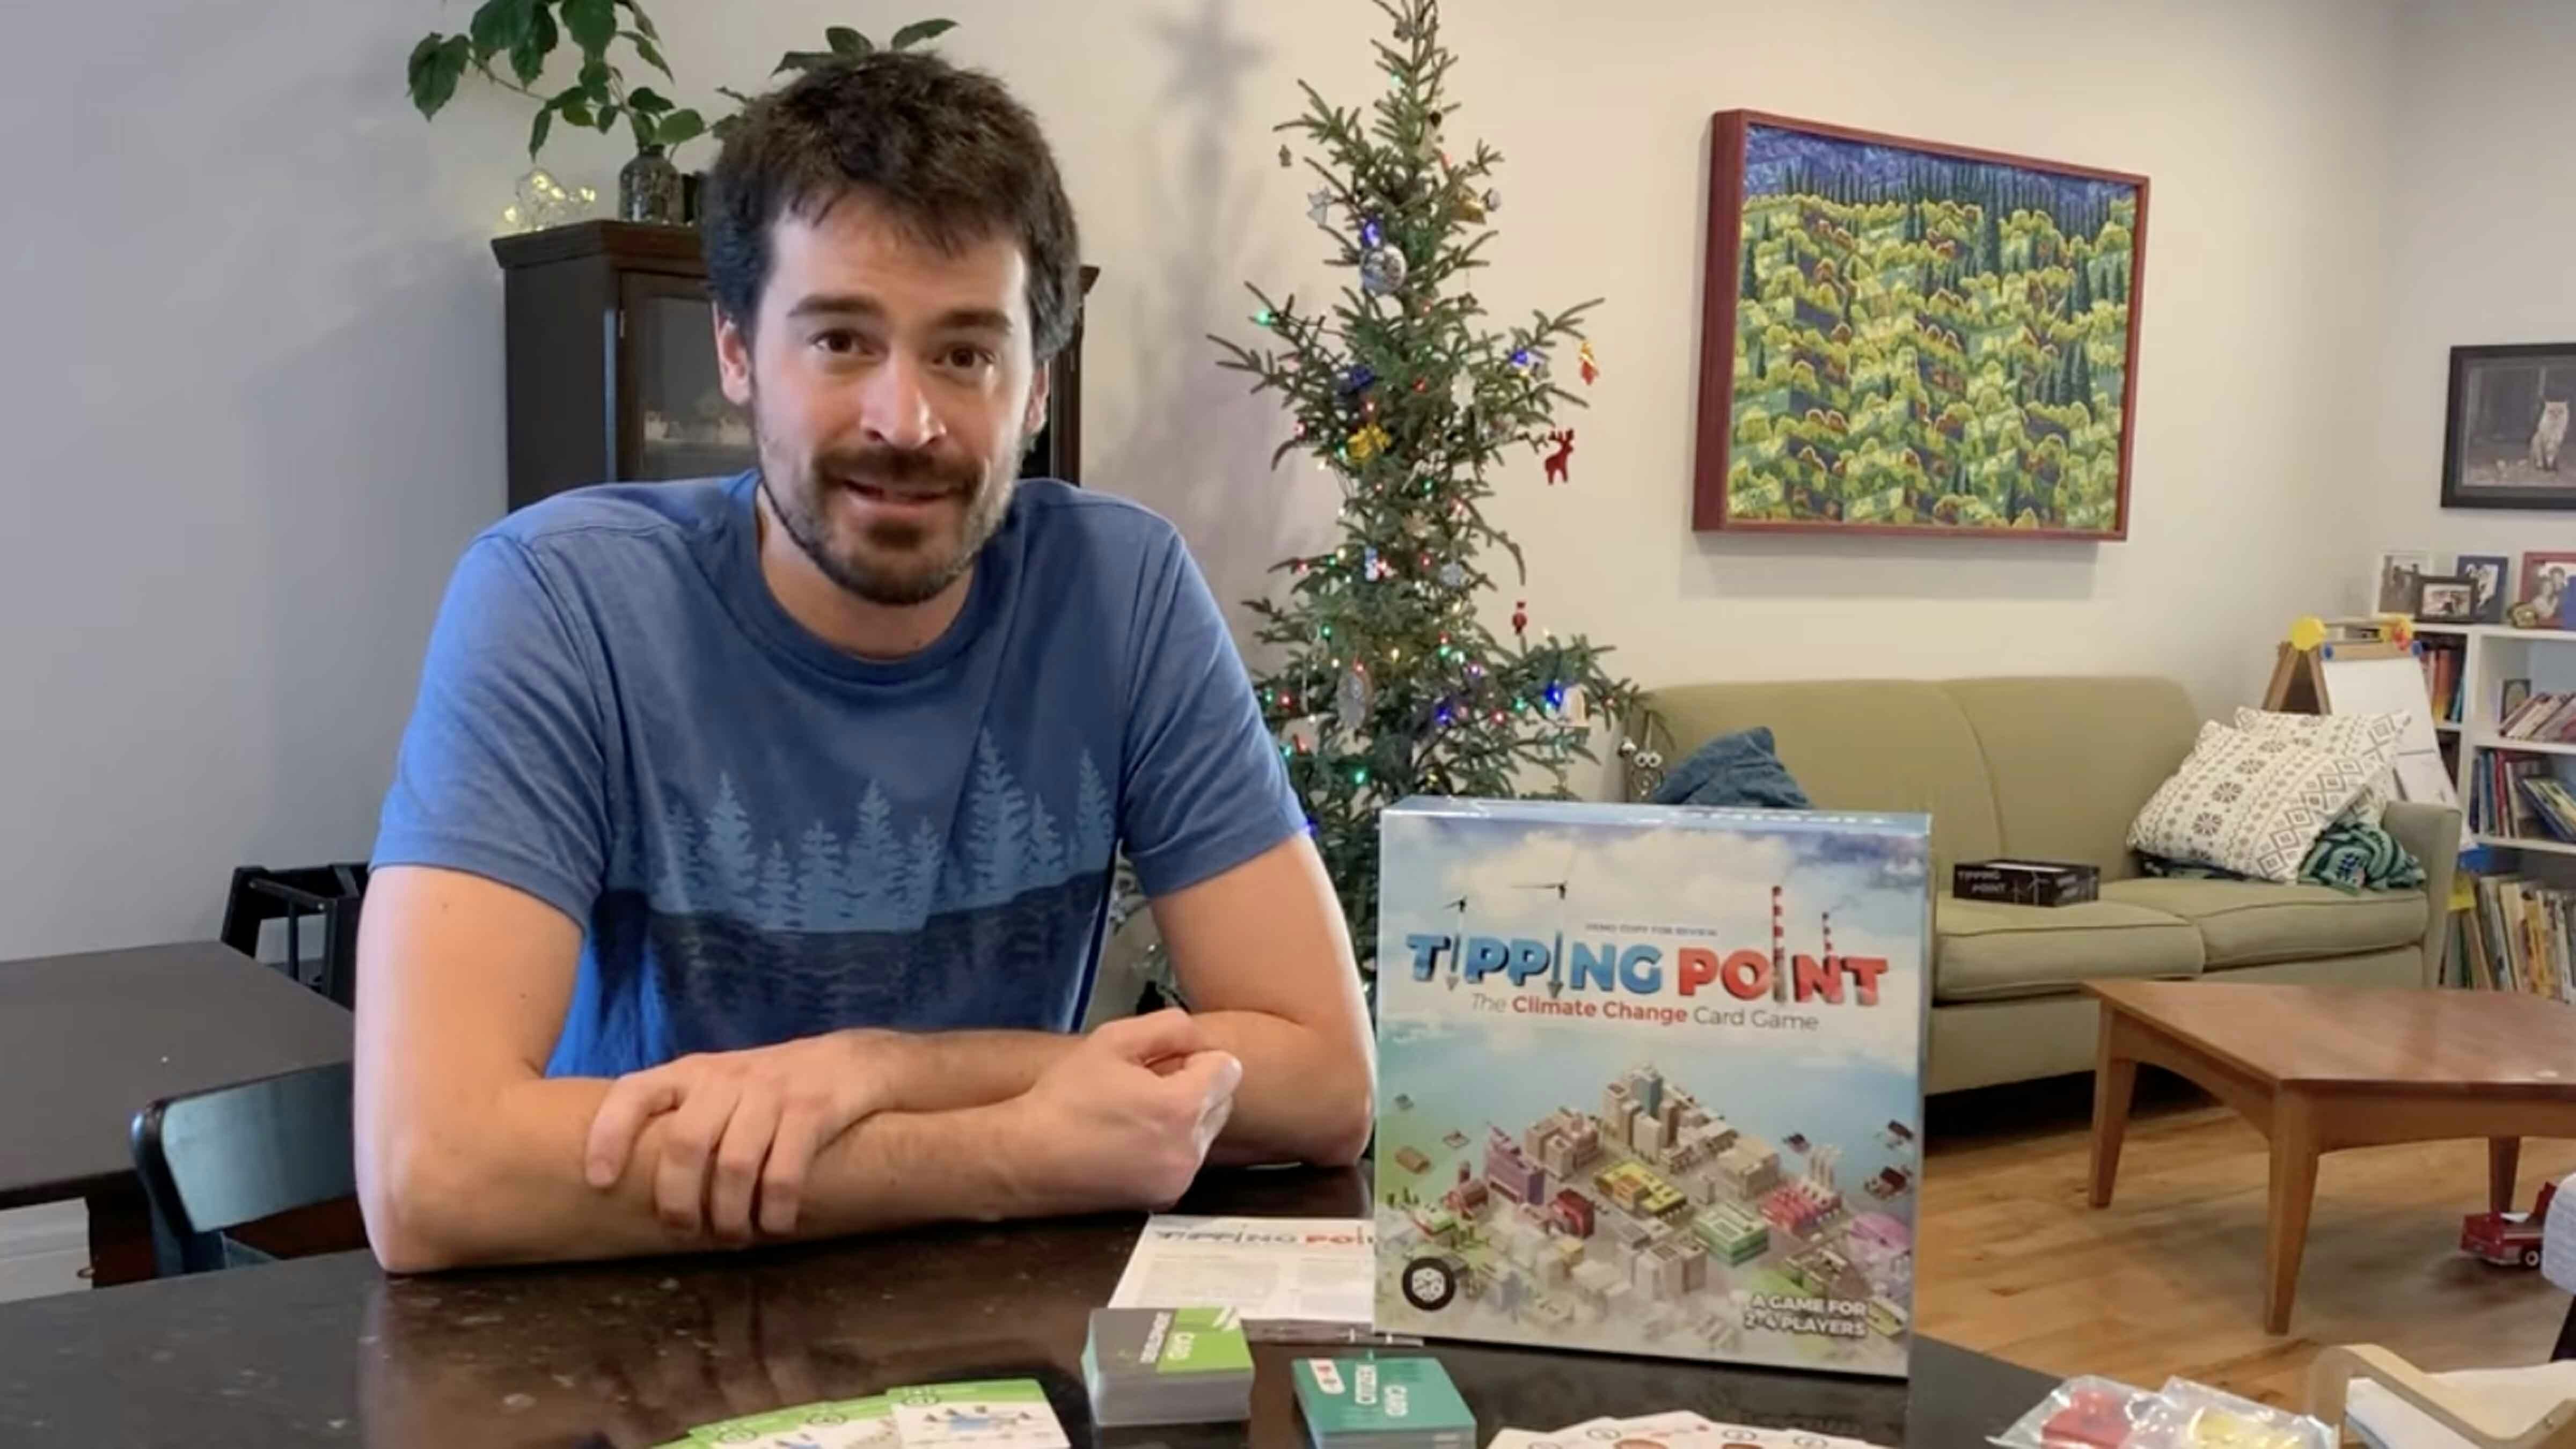 Ryan Smith, creator of the 'Tipping Point' board game where players try to reduce the accumulation of carbon dioxide in the atmosphere.